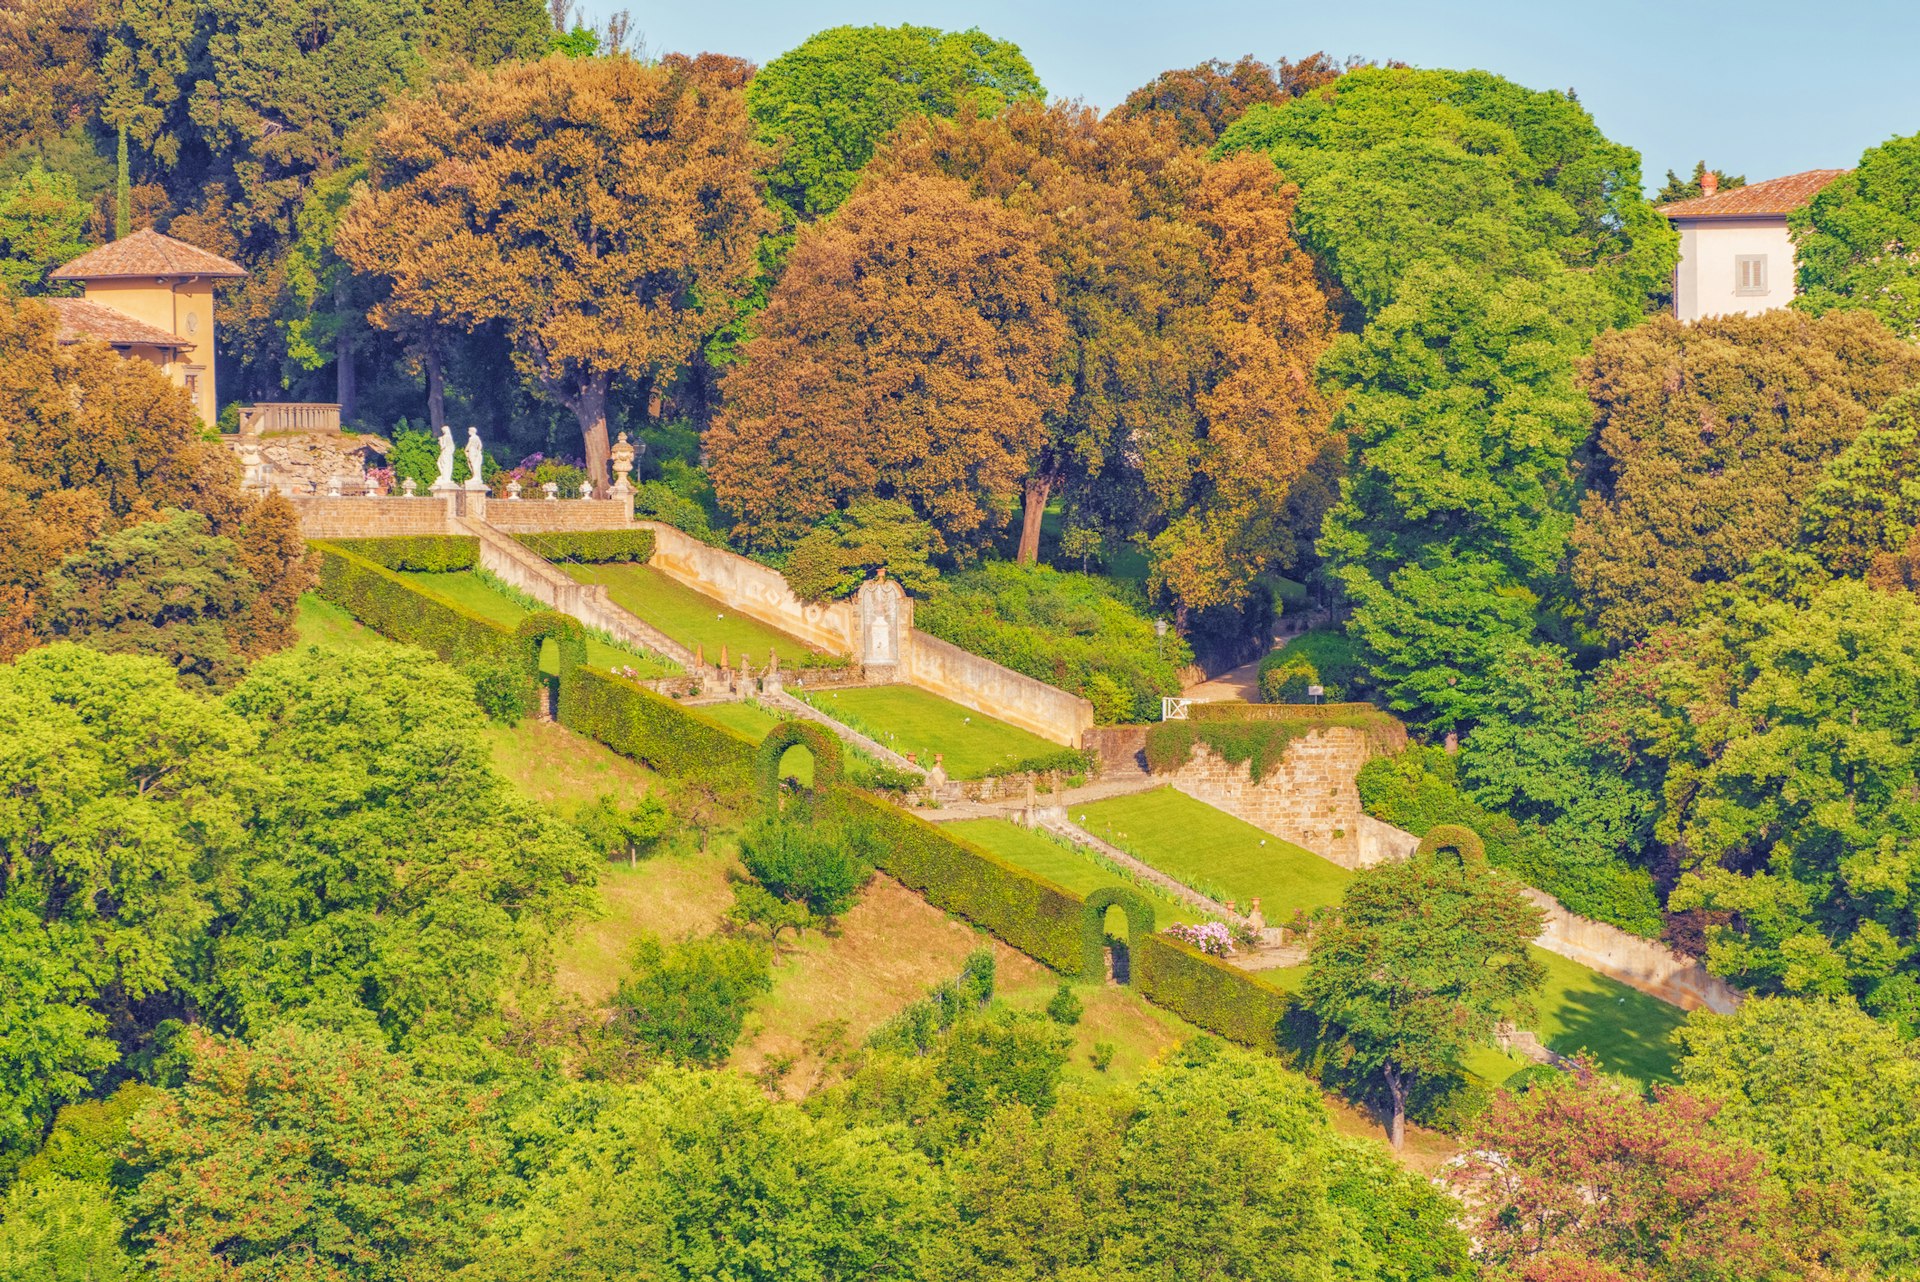 Beautiful landscape view of the Gardens of Bardini (Giardino Bardini) from Piazzale Michelangelo point.